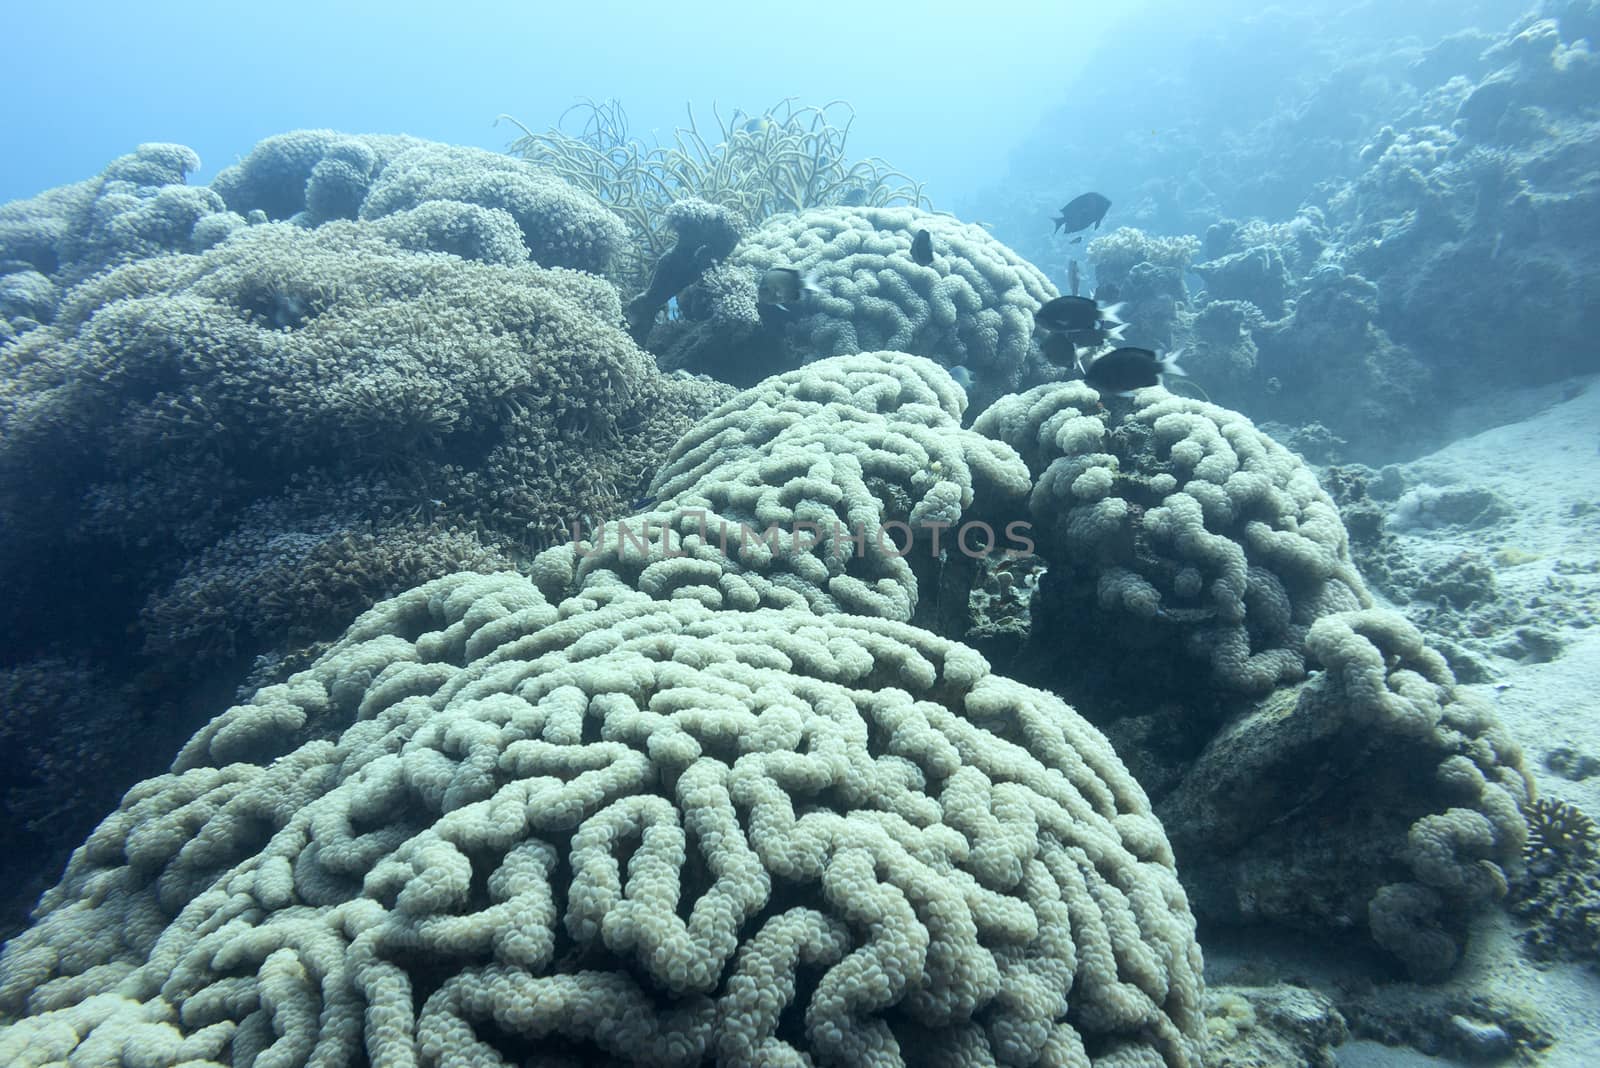 large grape coral at great depth at the bottom of tropical sea